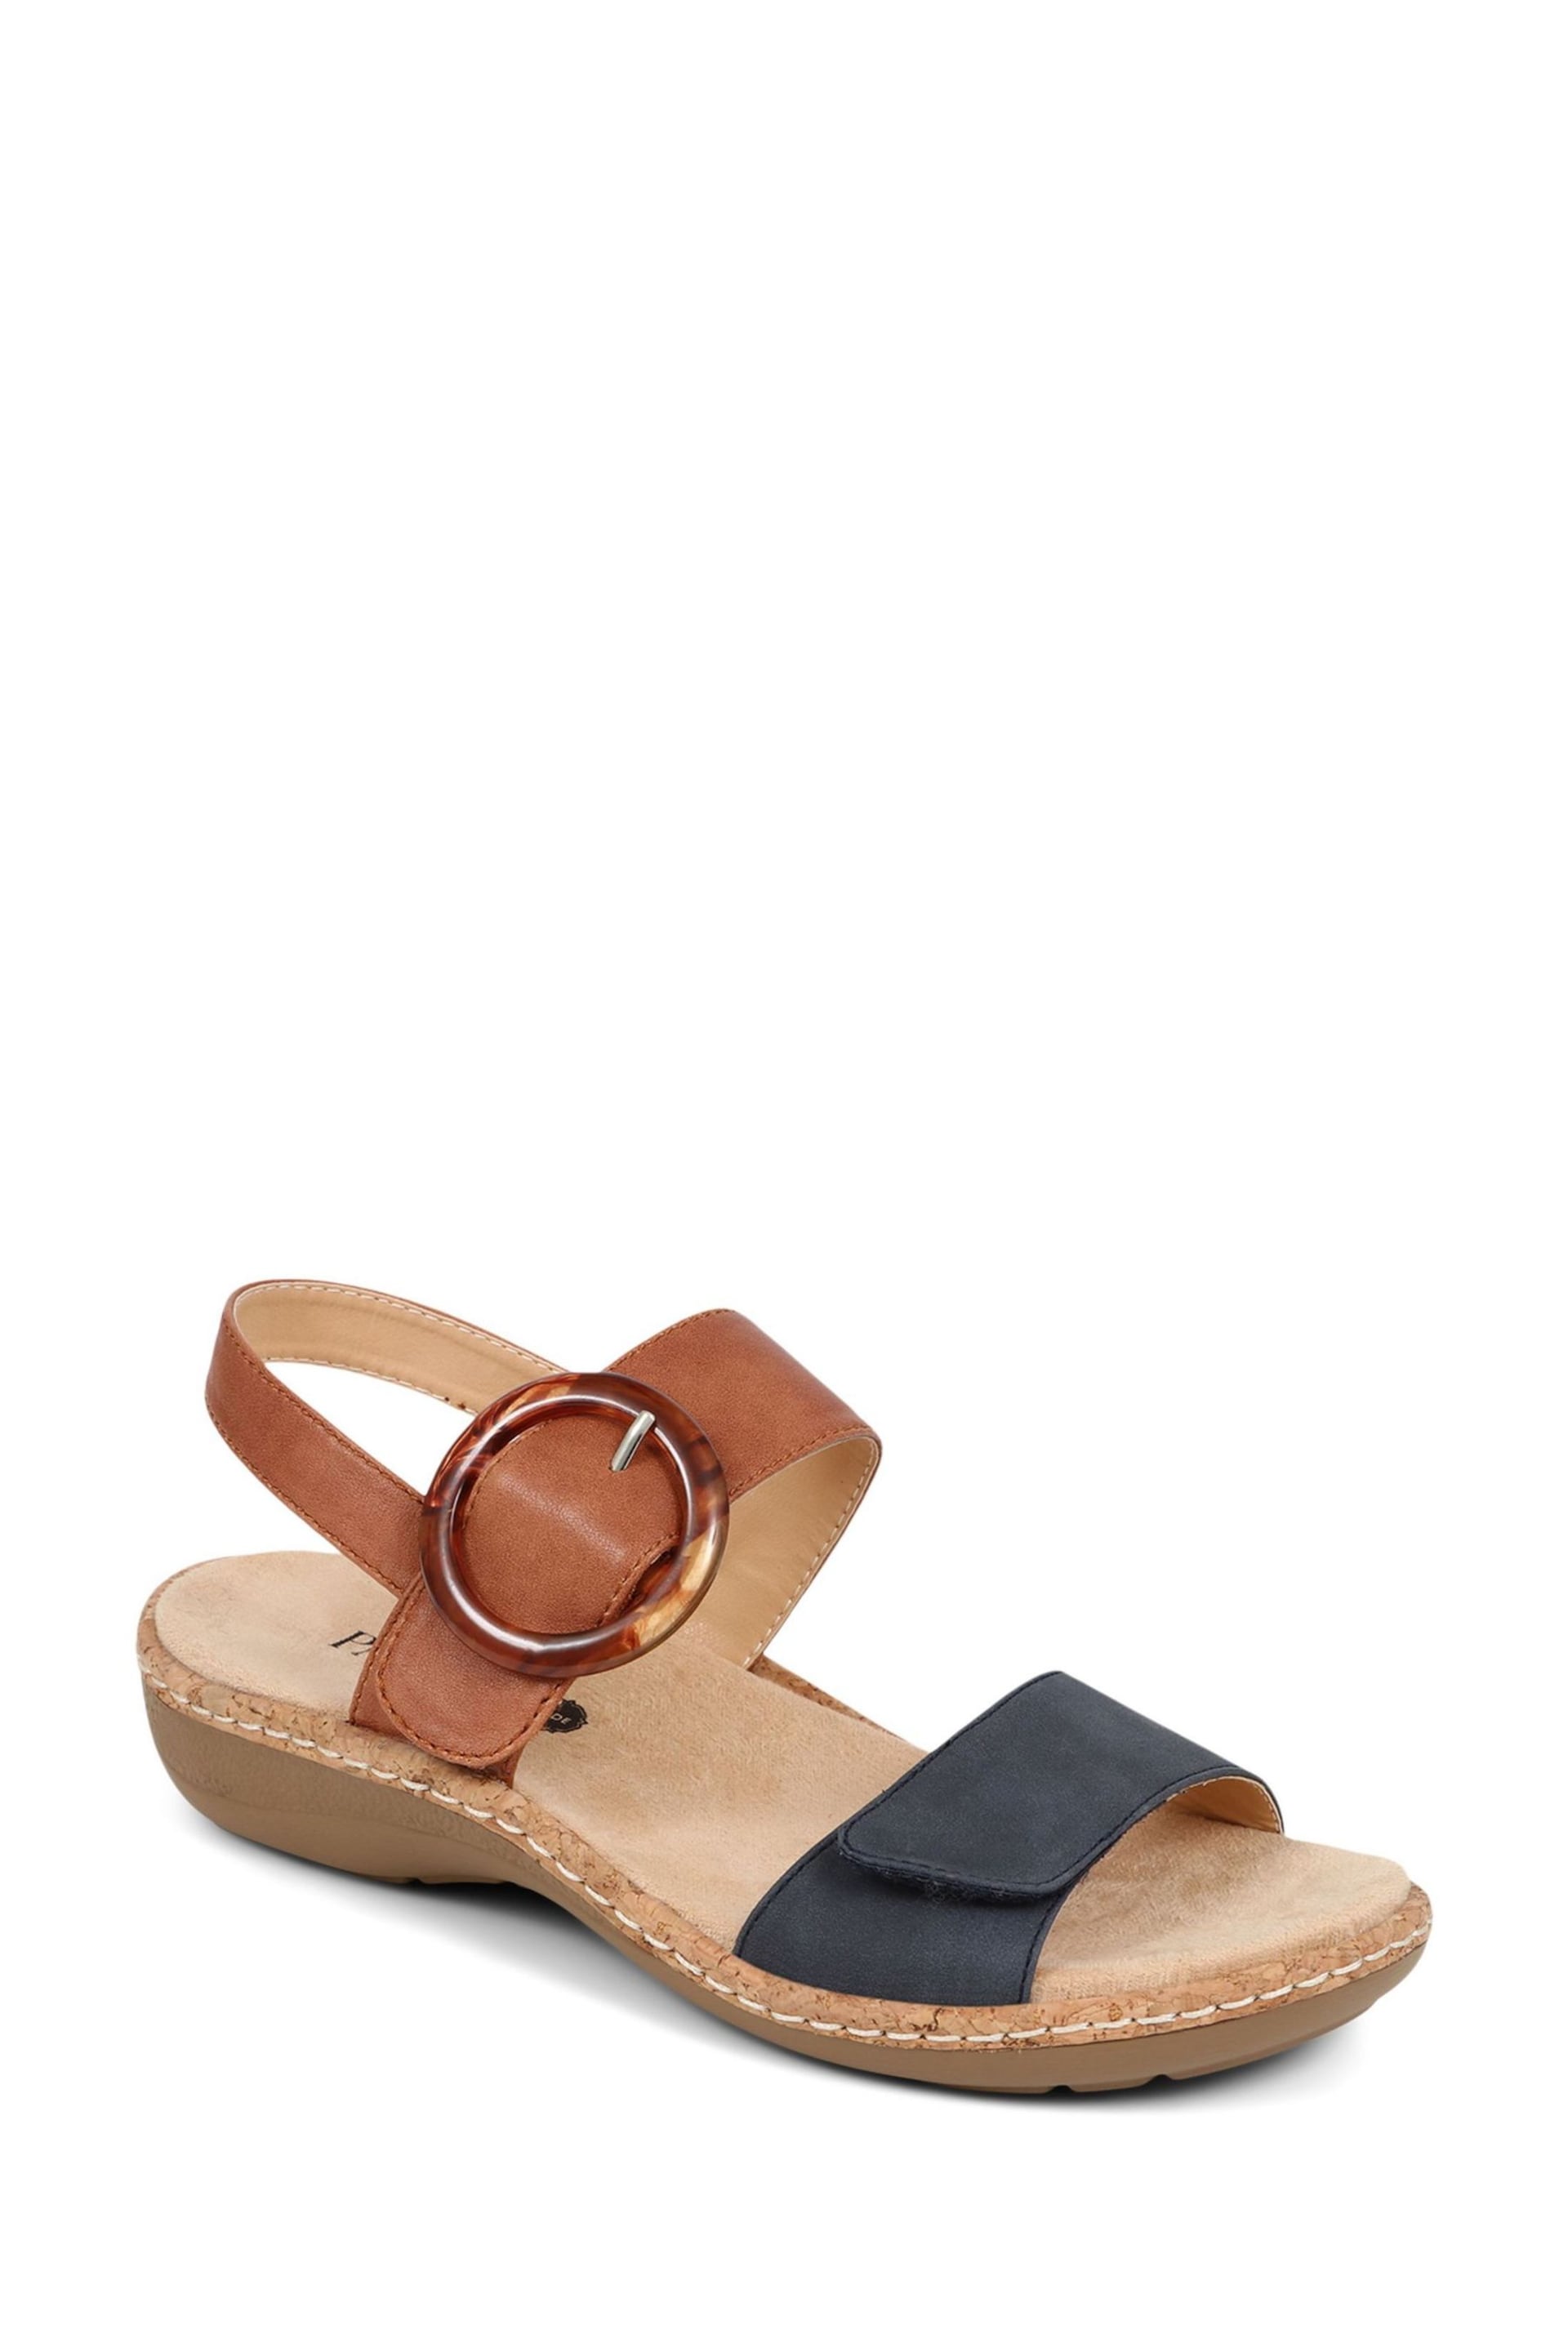 Pavers Brown Touch-Fasten Sandals - Image 1 of 5